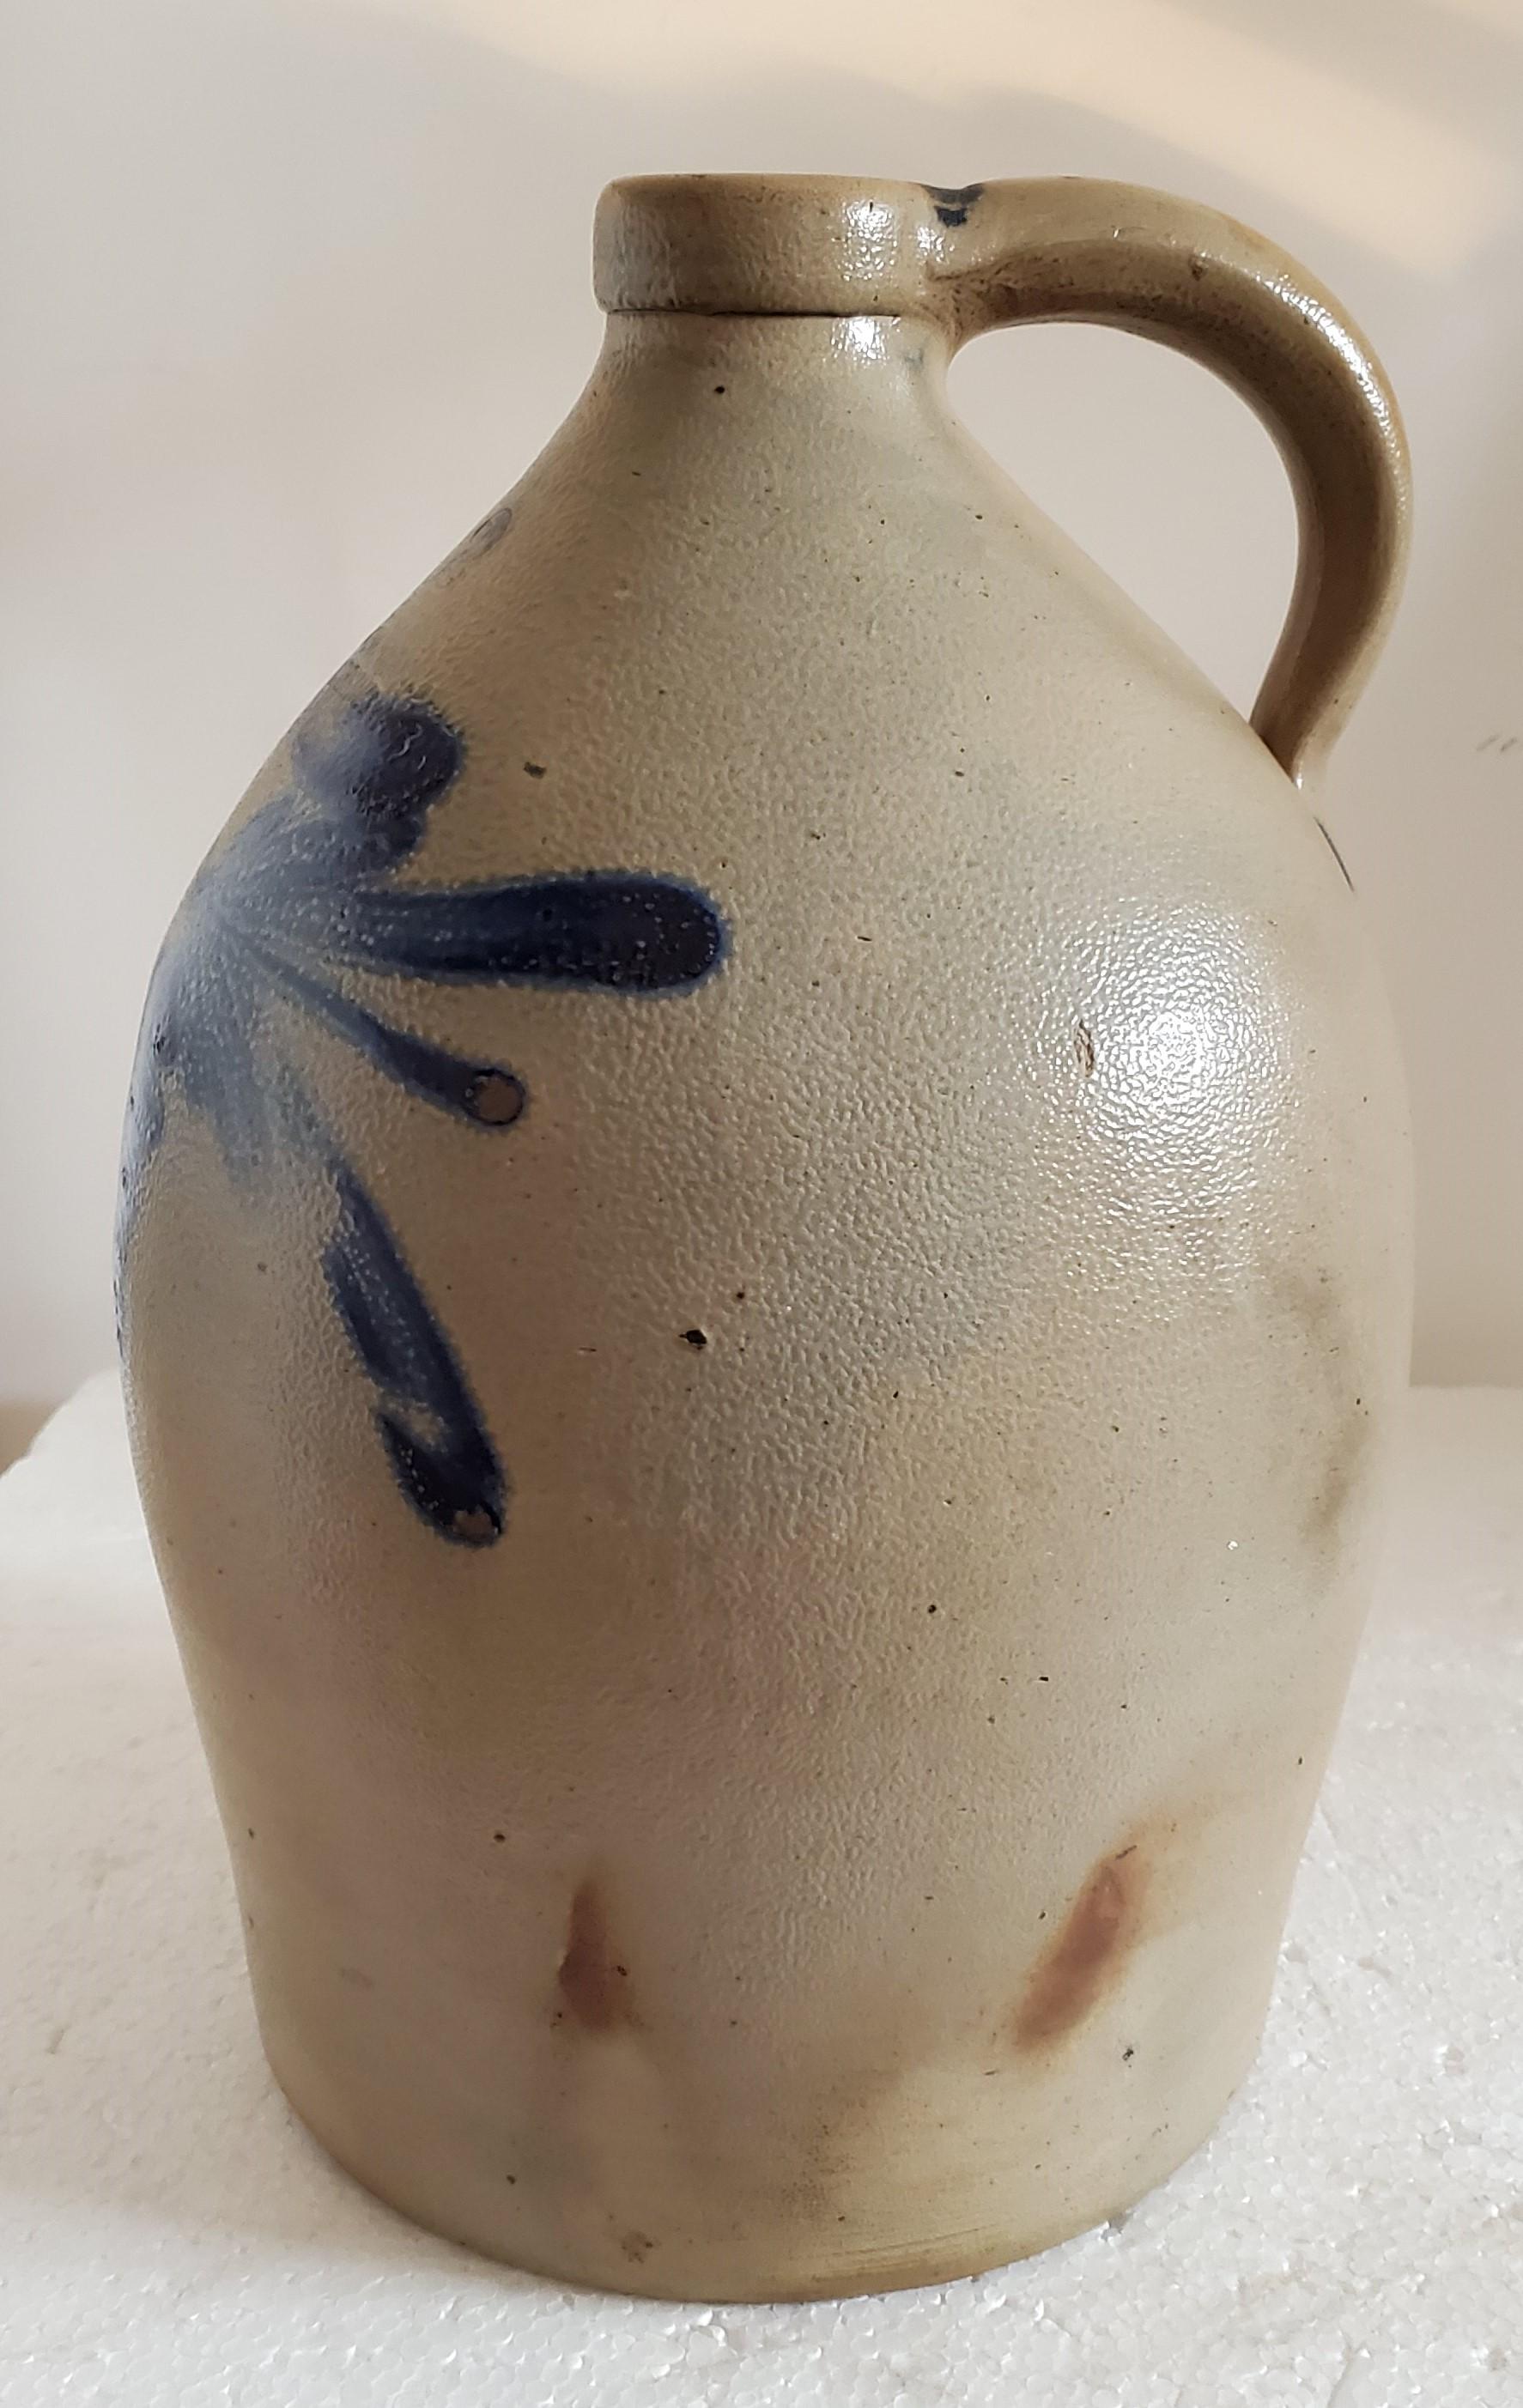 This fine blue 19th century decorated stoneware two gallon Cowden & Wilcox jug is in fine condition. This heavy flower design is quite unusual. Condition is mint. This was made in Harrisburg, Pennsylvania.